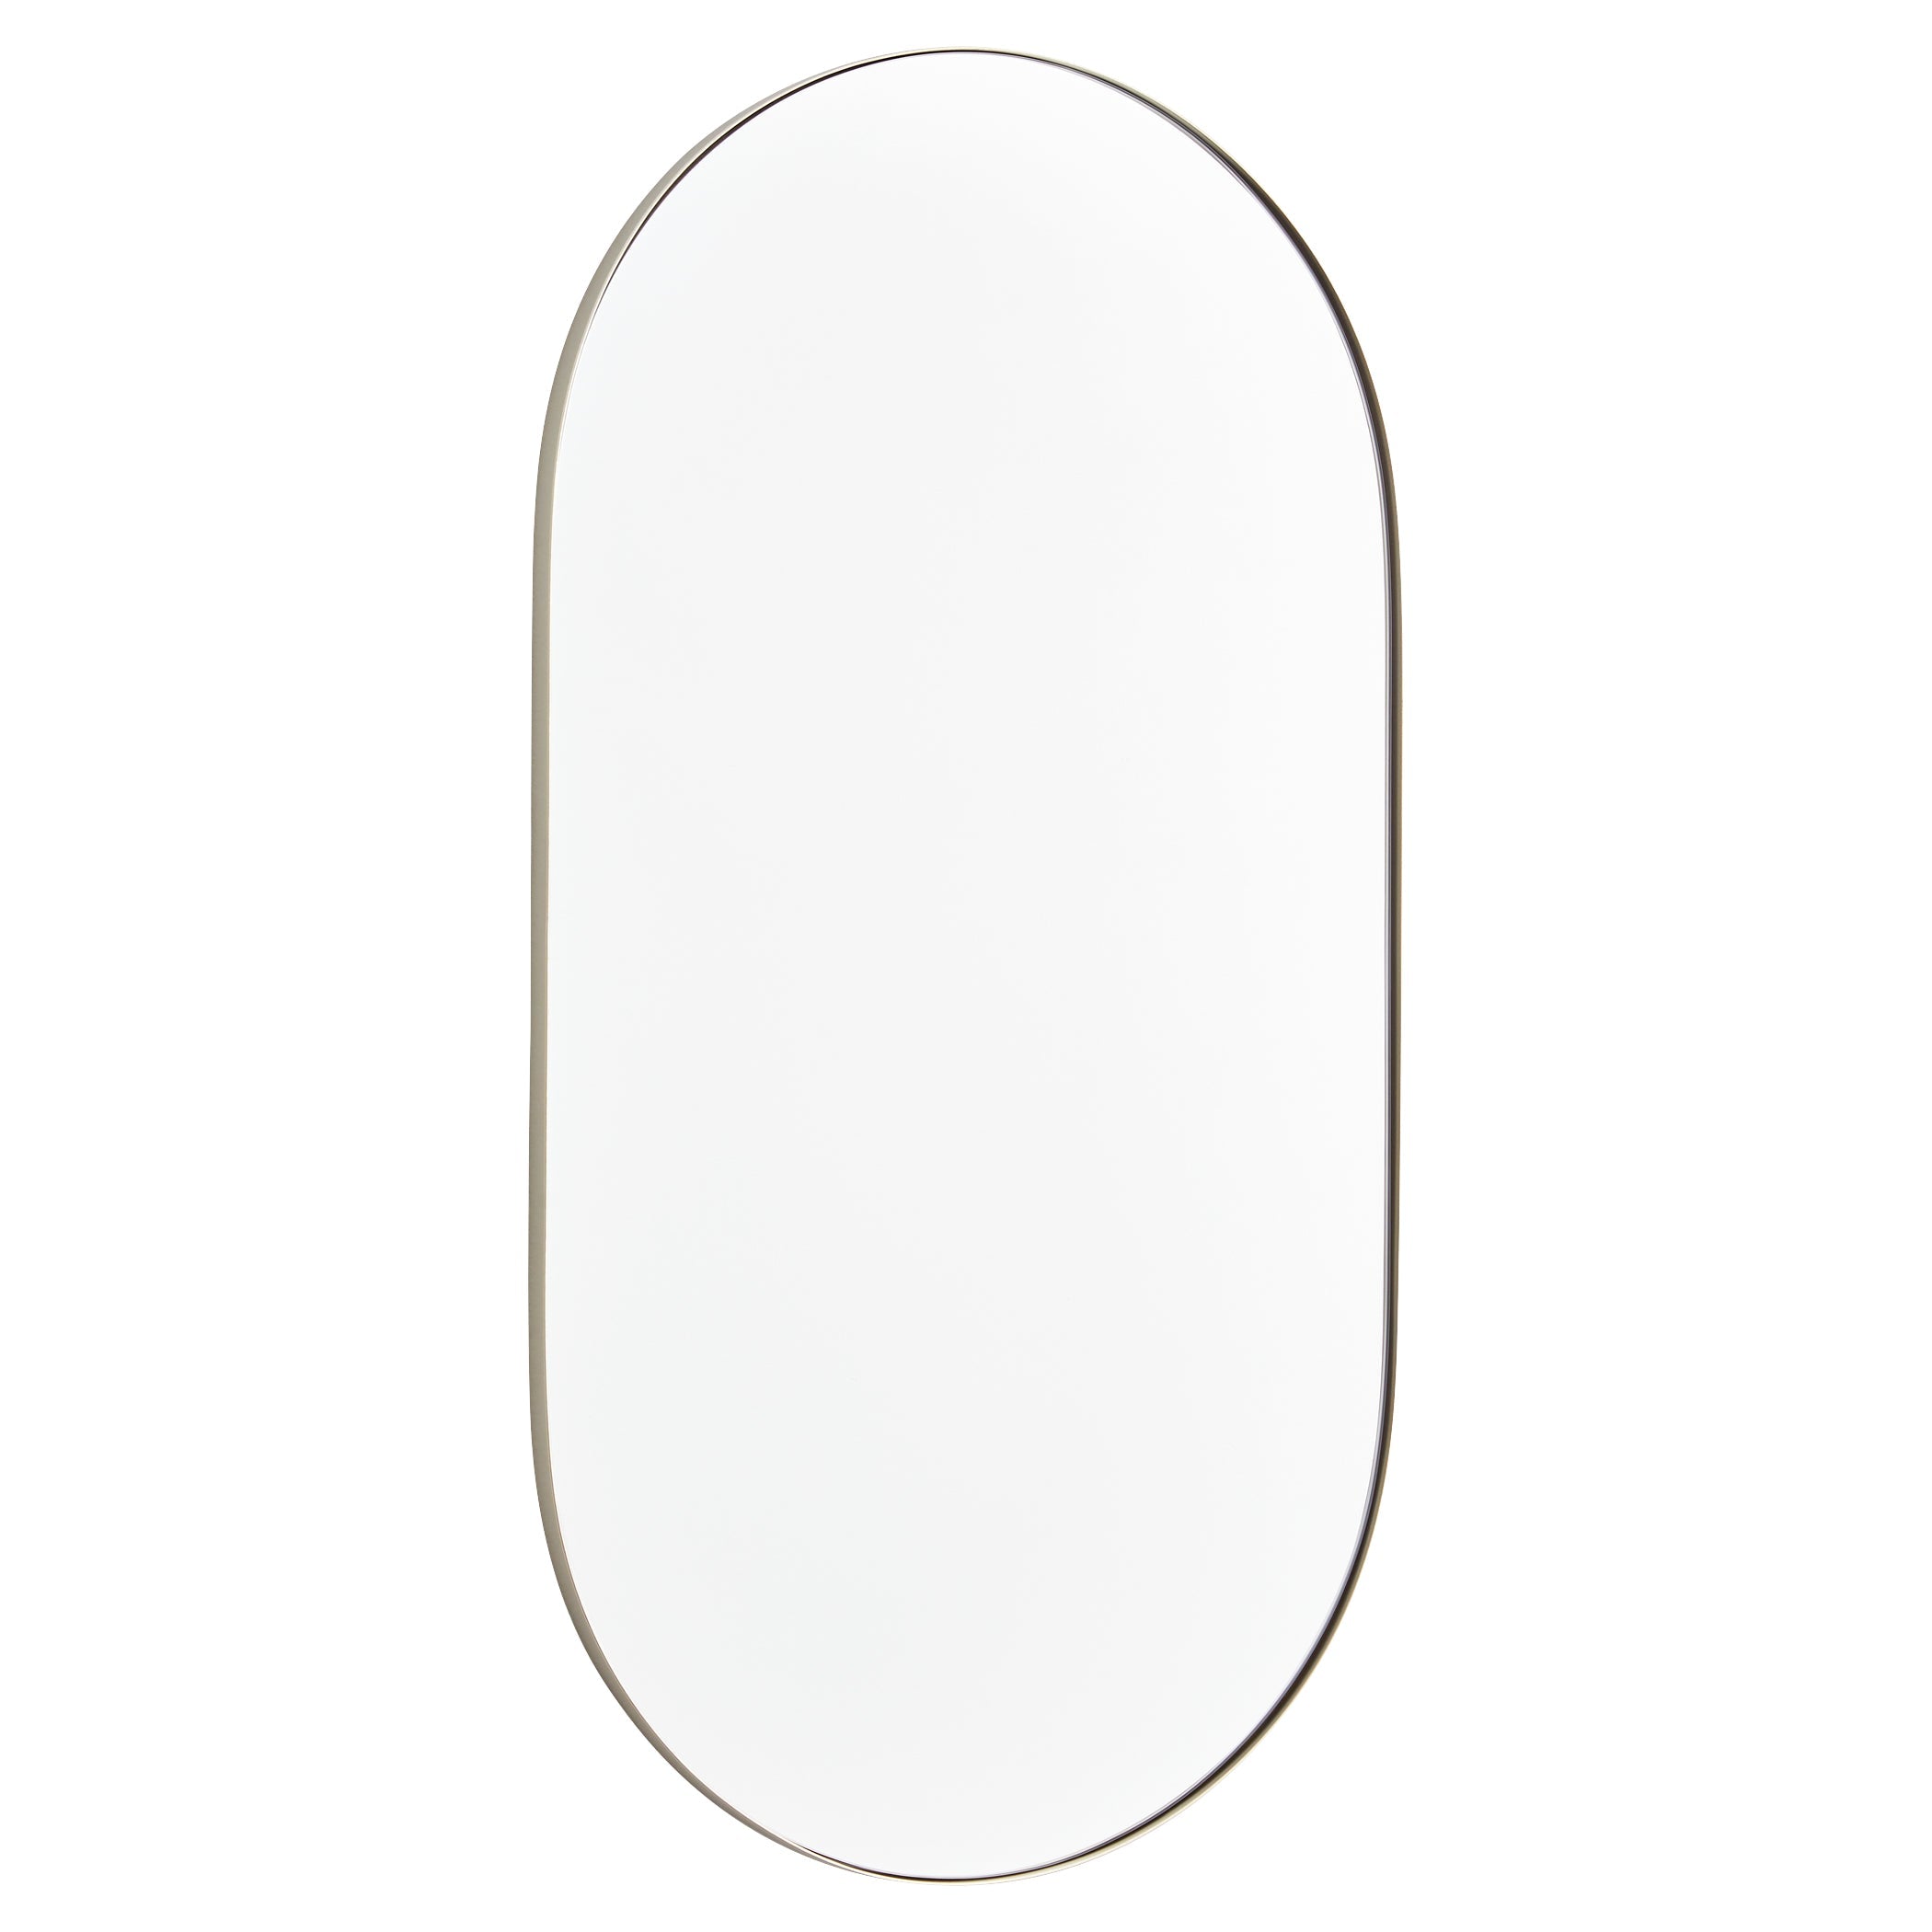 Quorum 15-2140-61 Mirror - Silver Finished